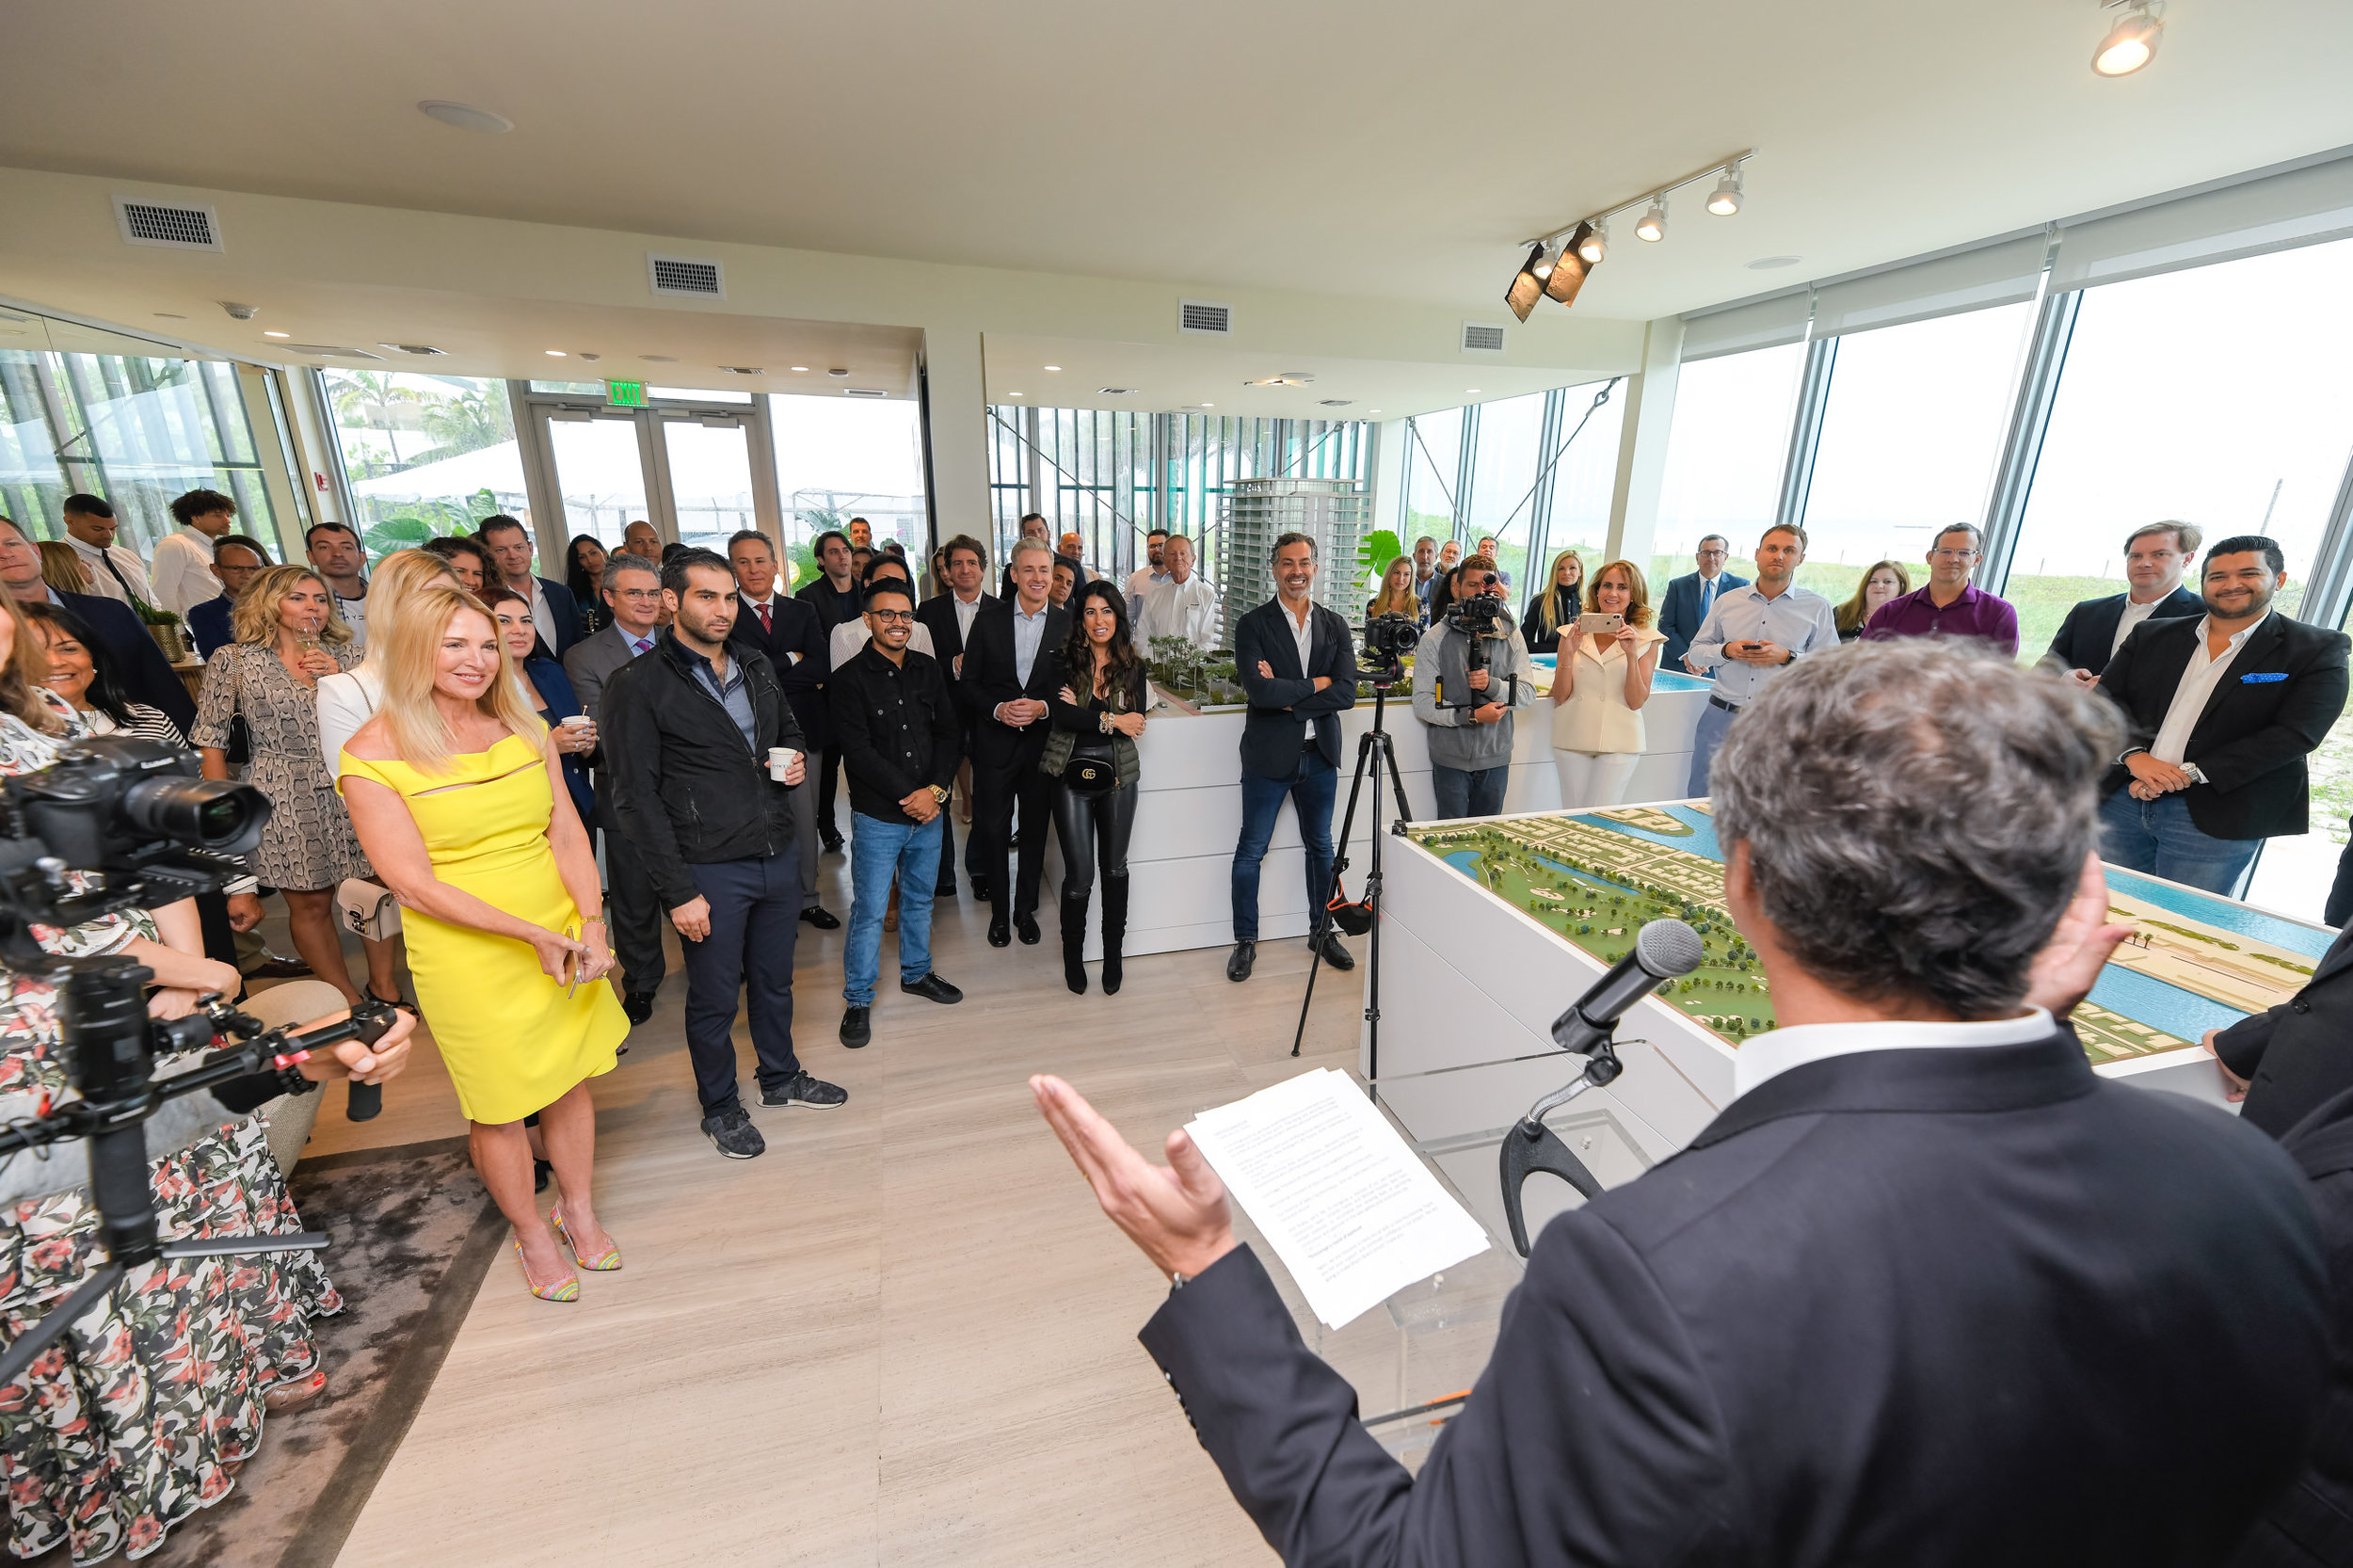 Guests gather for opening remarks of groundbreaking ceremony Multiplan Real Estate Asset Management Breaks Ground On 57 Ocean In Miami Beach Demetri Demascus PROFILEmiami